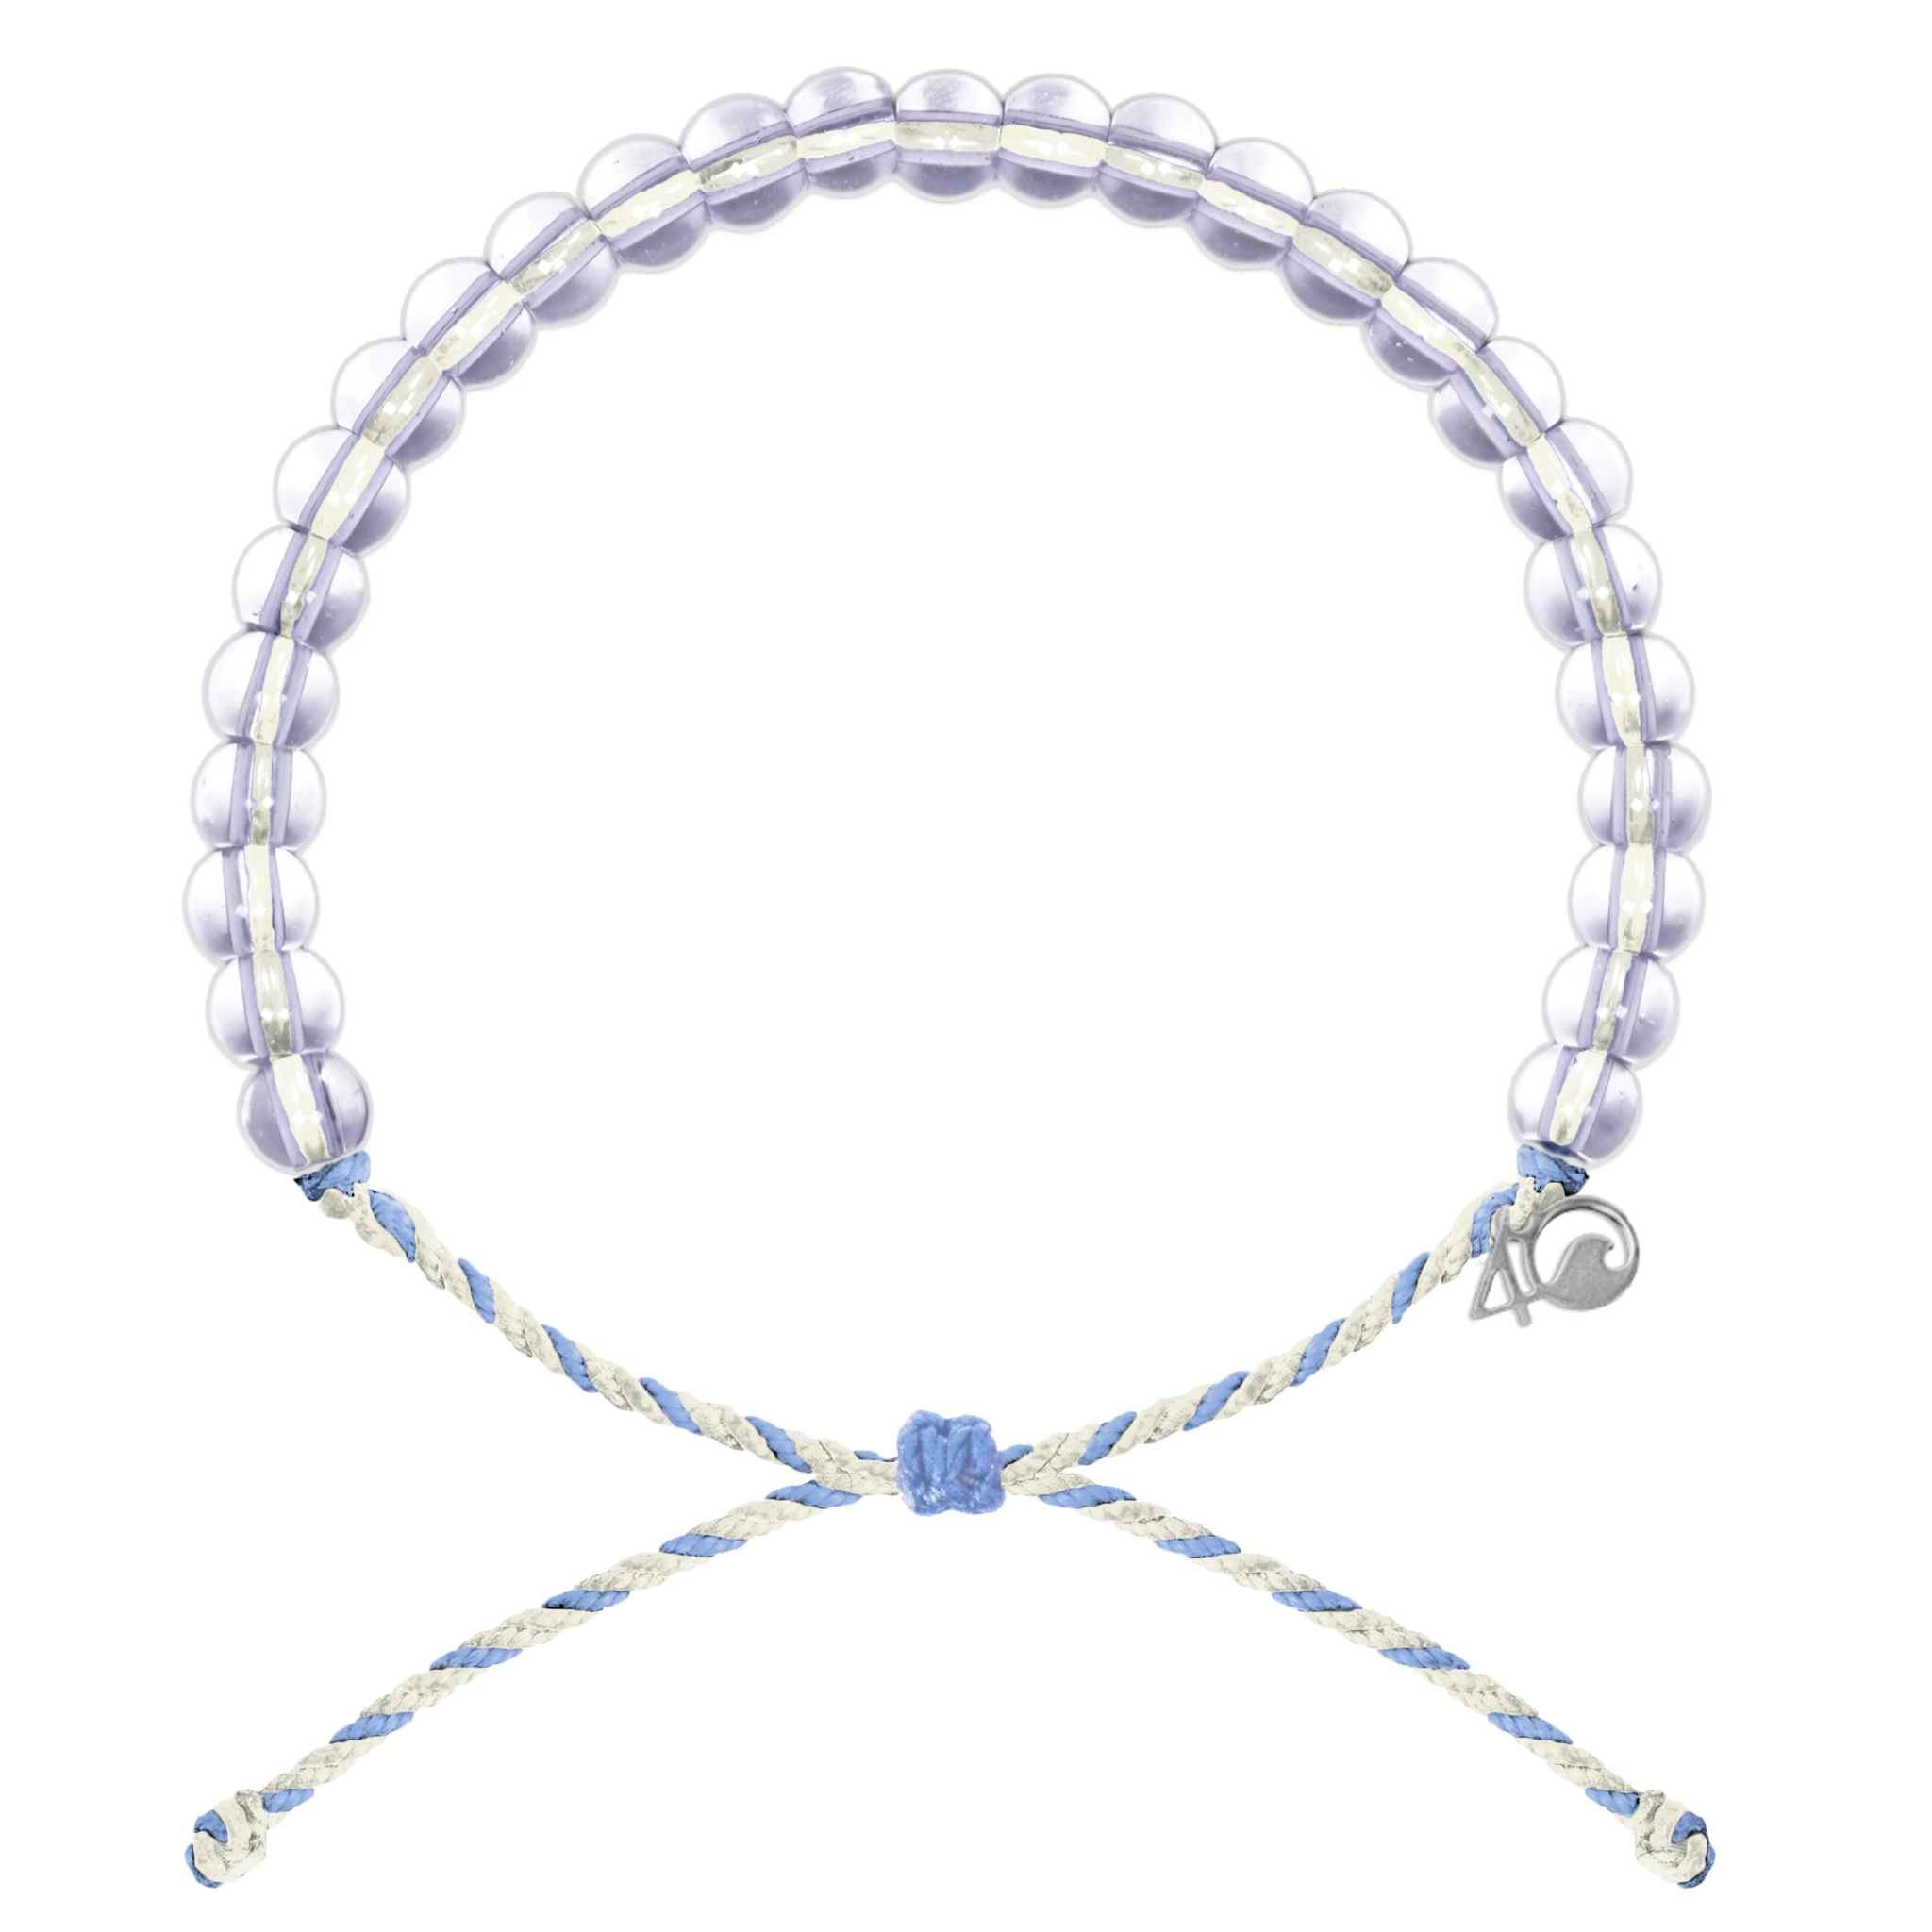 EACH PURCHASE OF THE 4OCEAN BRACELET BENEFITS OCEAN CLEANUP  Titanic  Museum Attraction